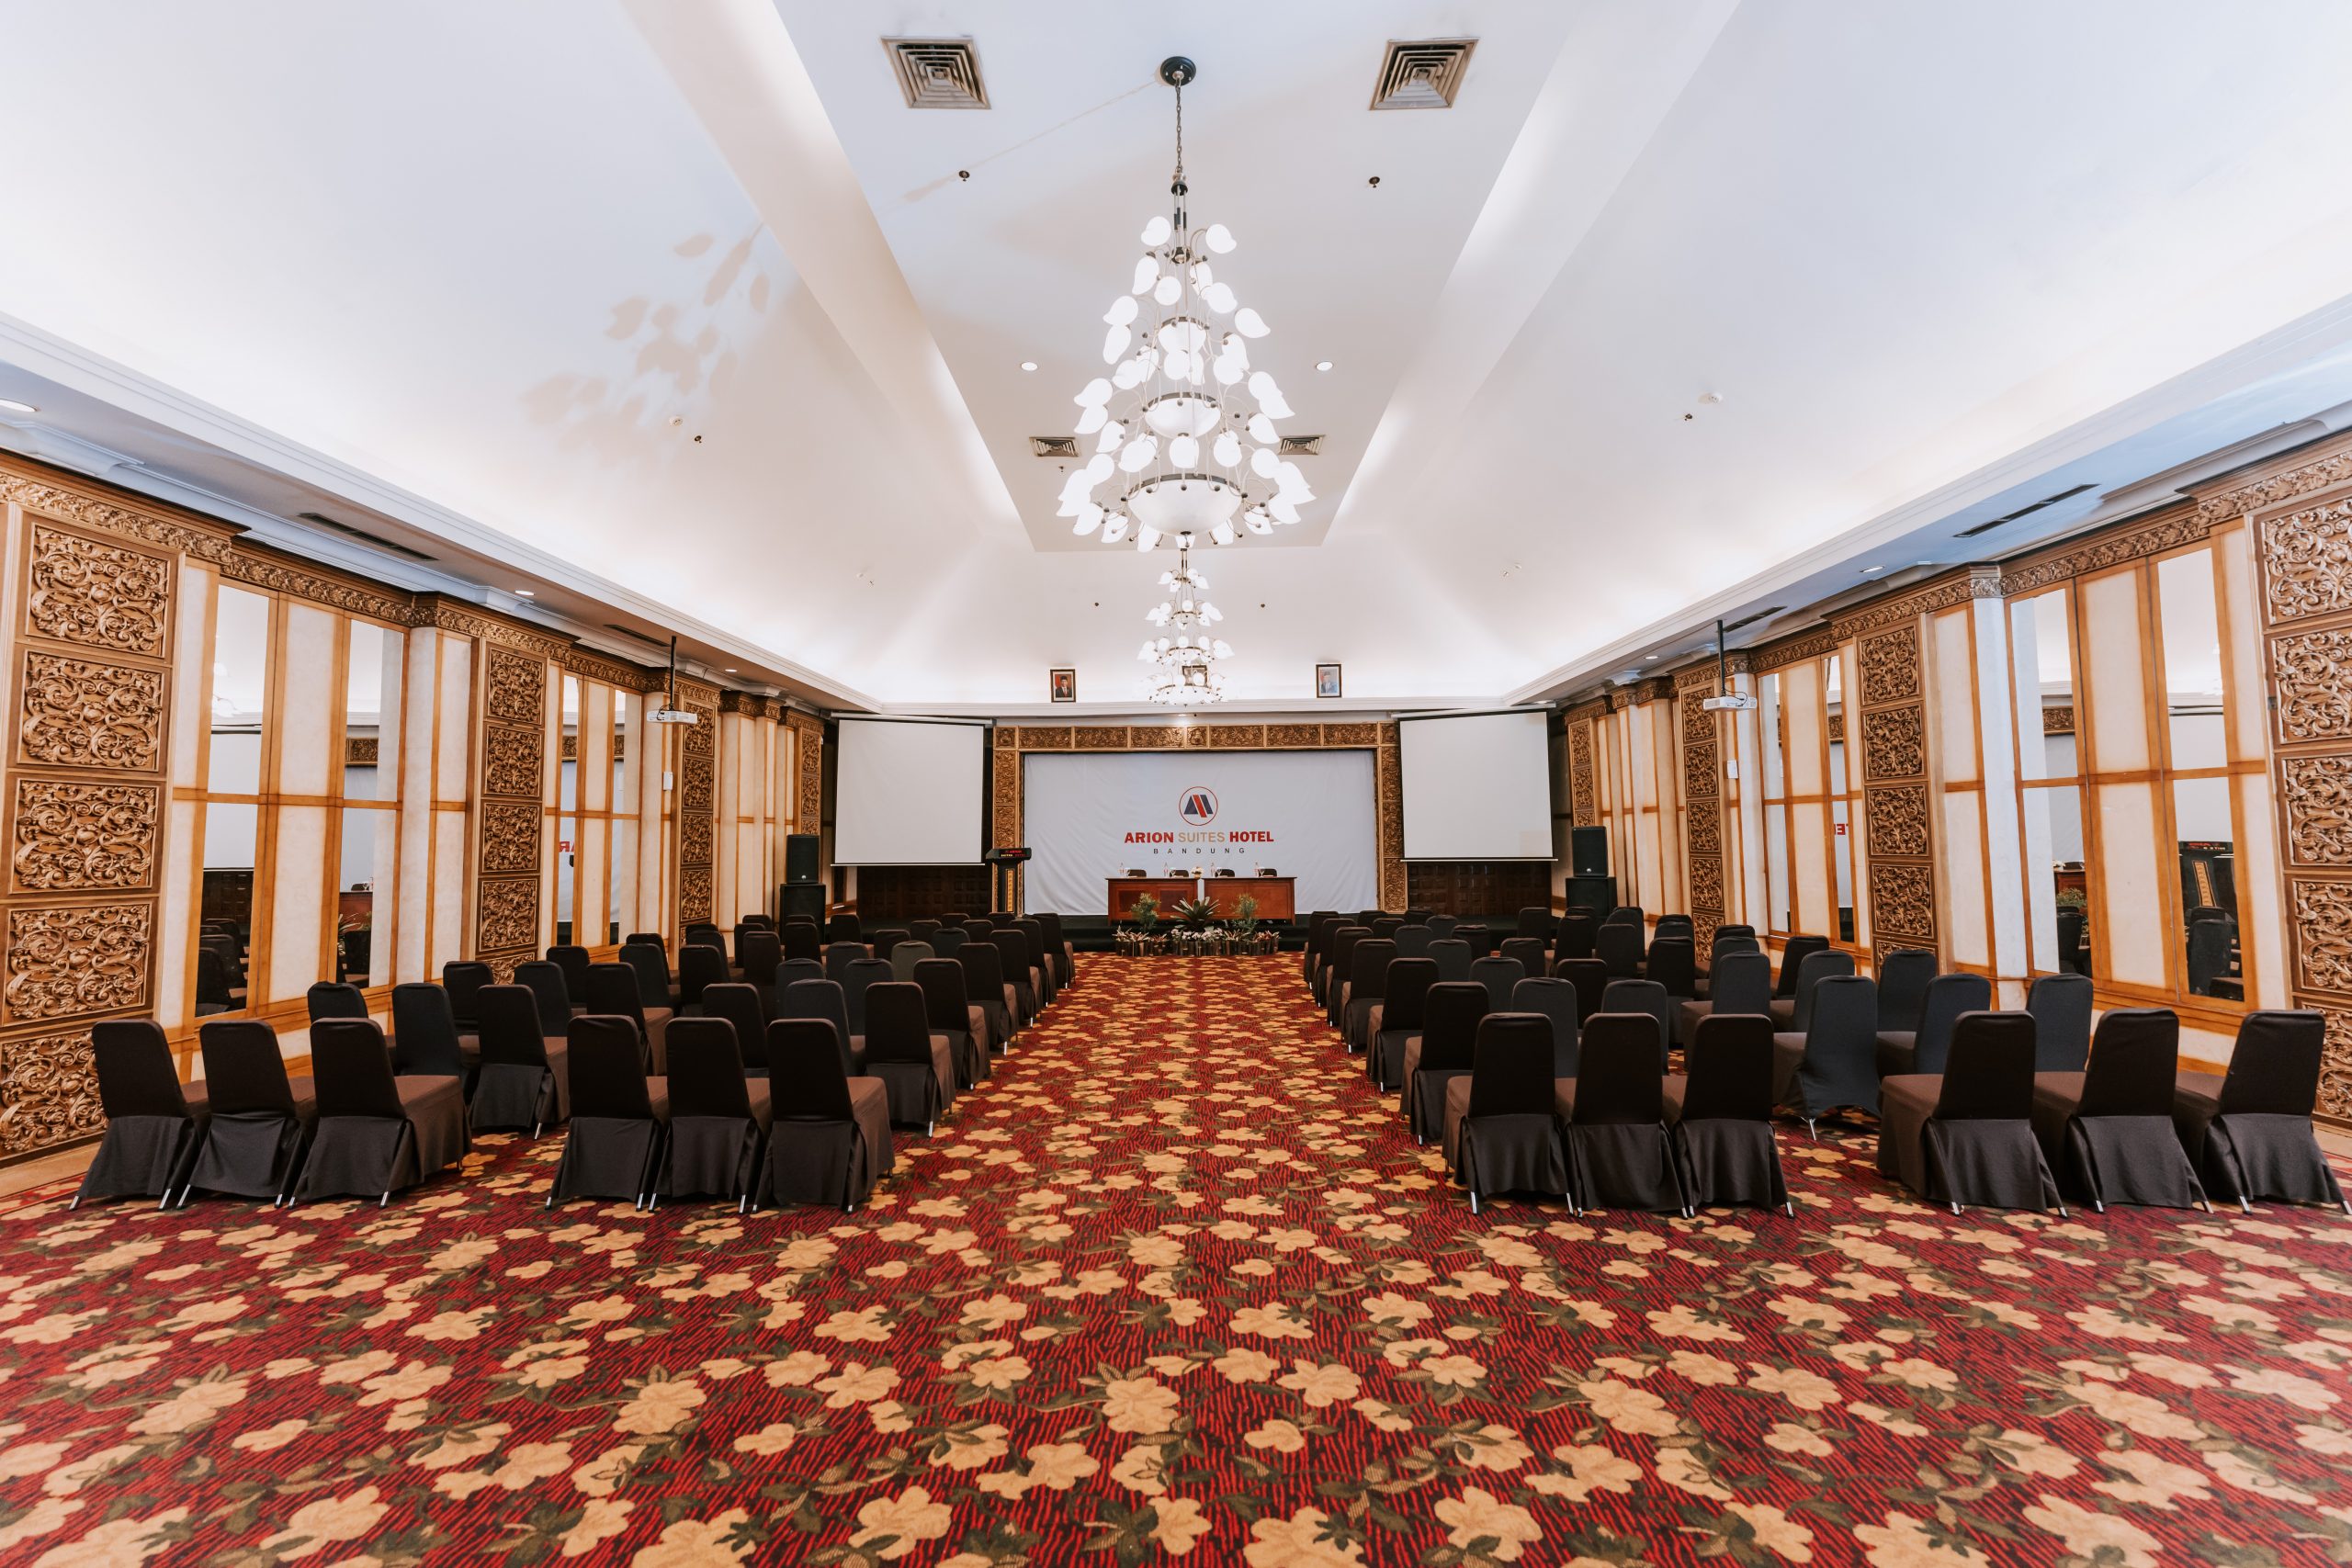 Meeting Room - ARION SUITES HOTEL BANDUNG